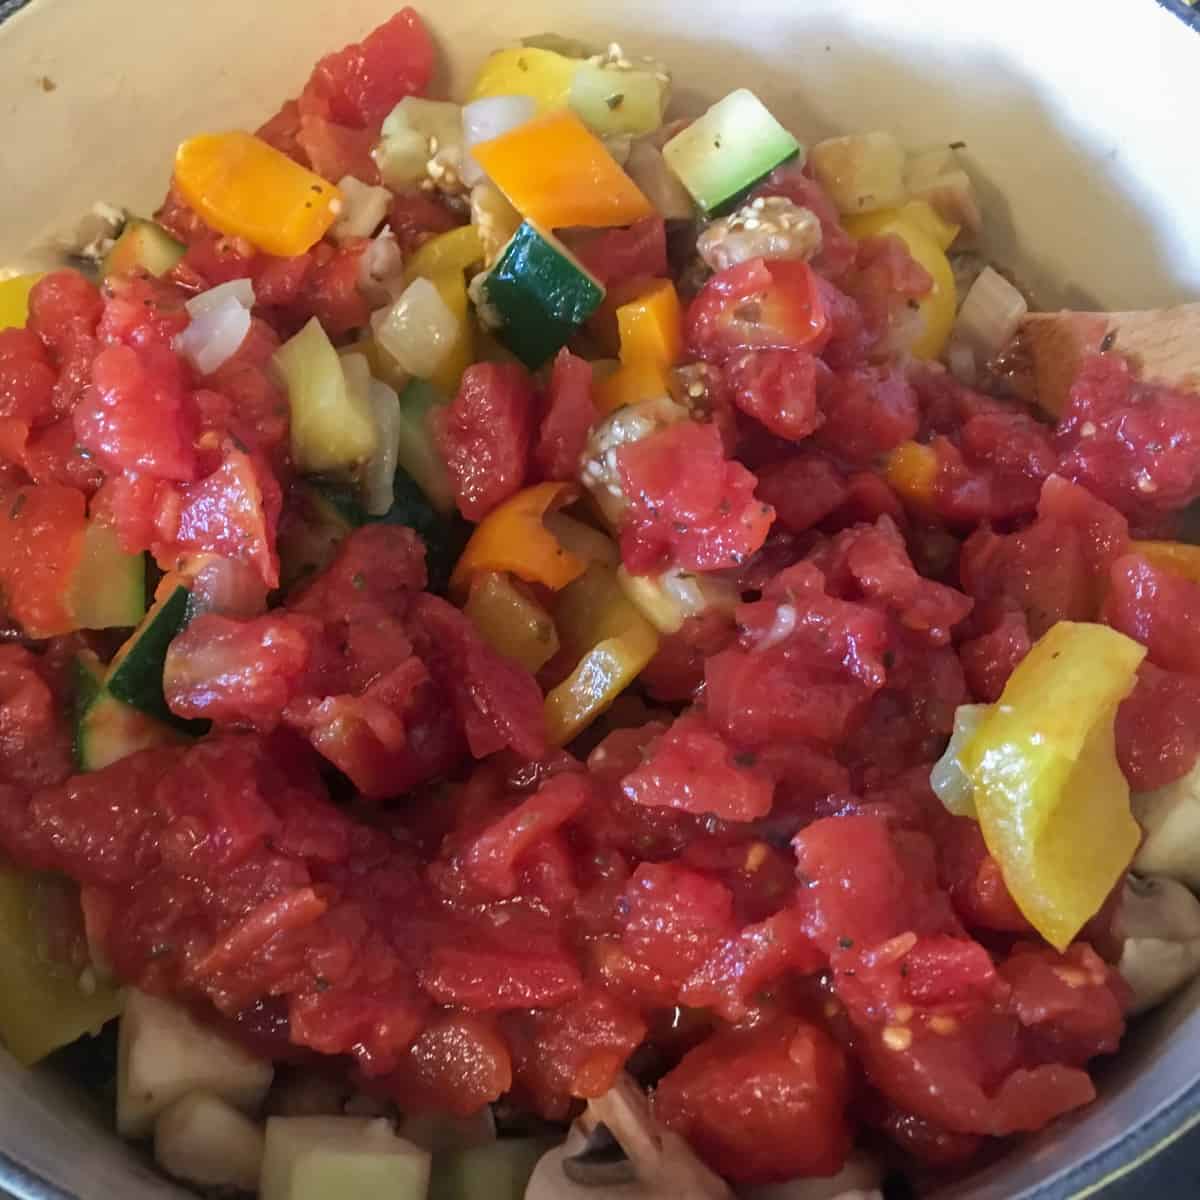 A can of diced tomatoes dumped into a pot with other vegetables.